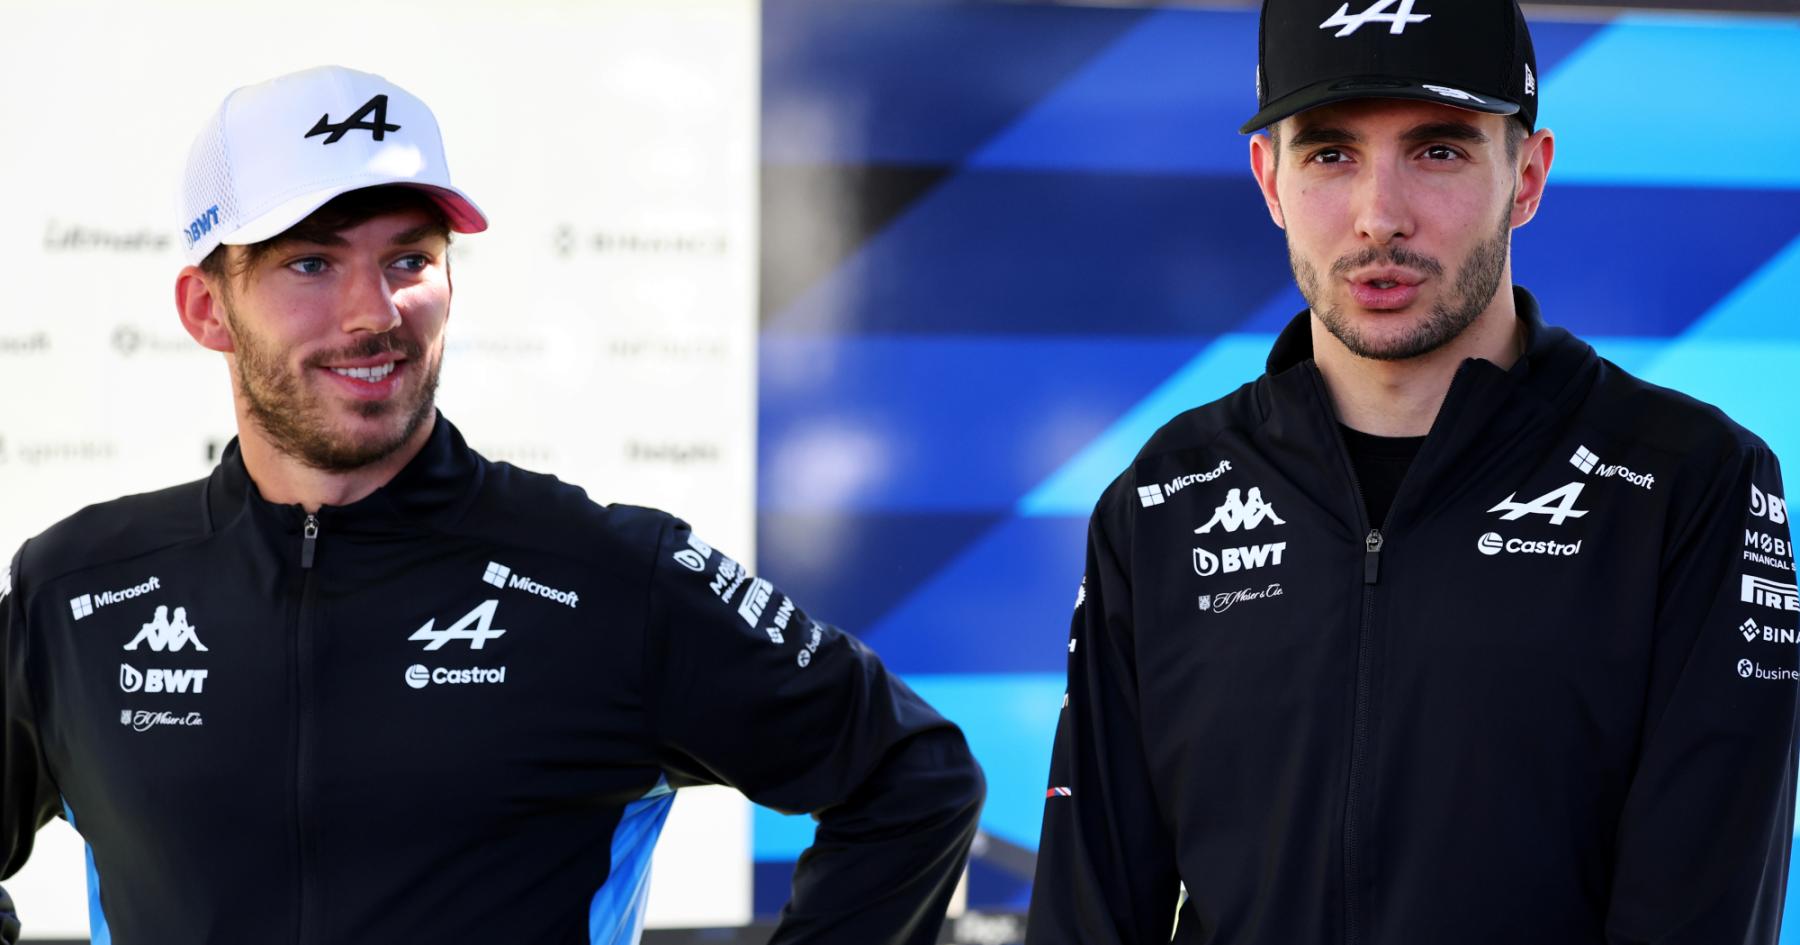 Gasly Extends Olive Branch in the Resolution of Ongoing Feud with Ocon